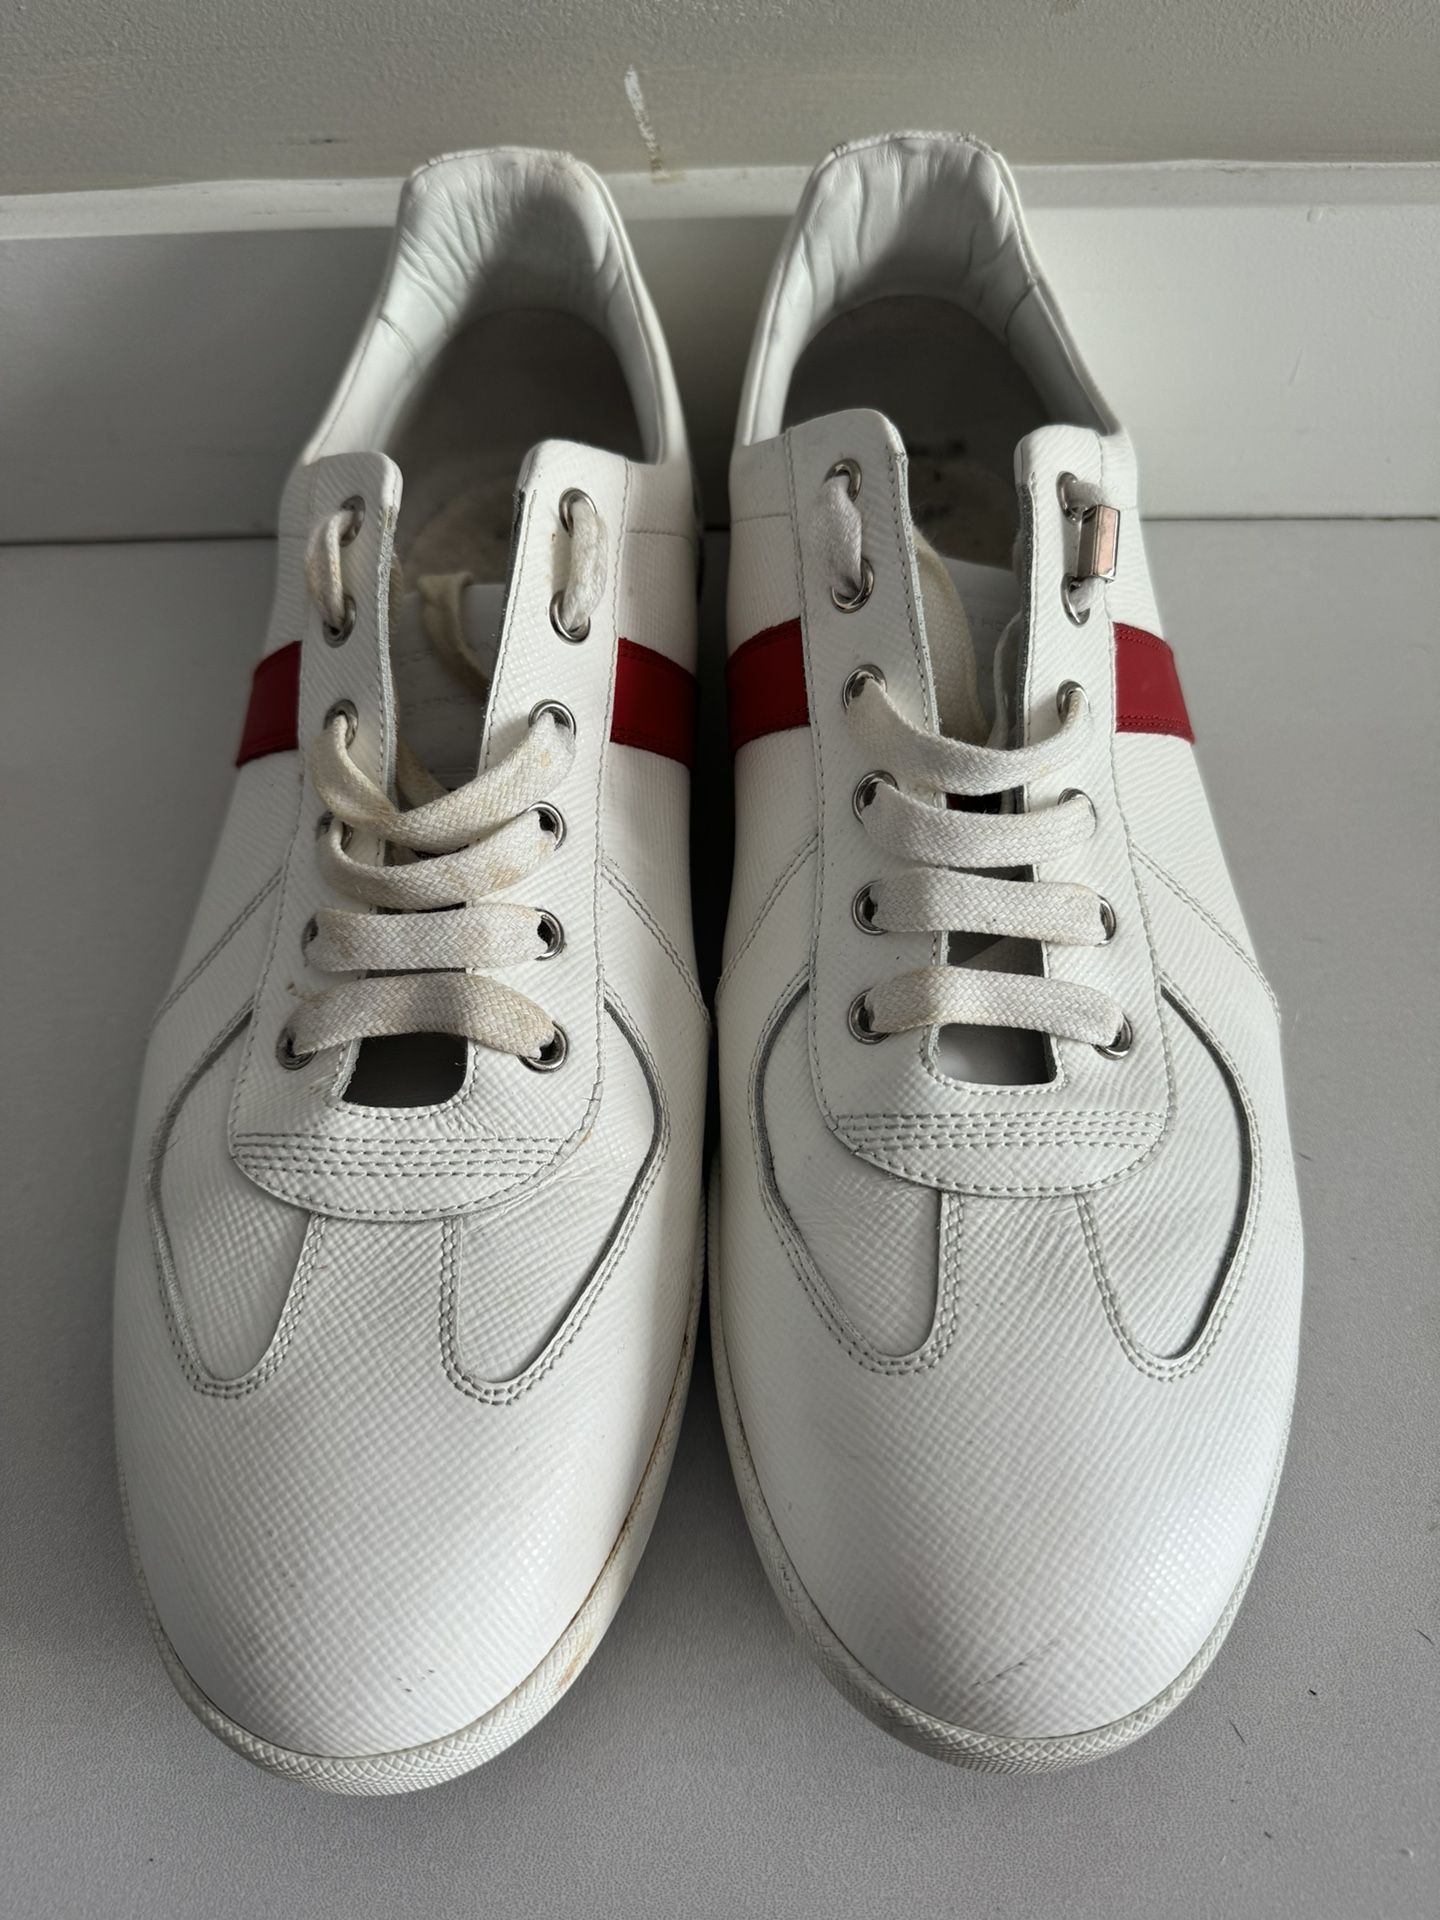 Christian Dior Men Leather Sneakers Size 46